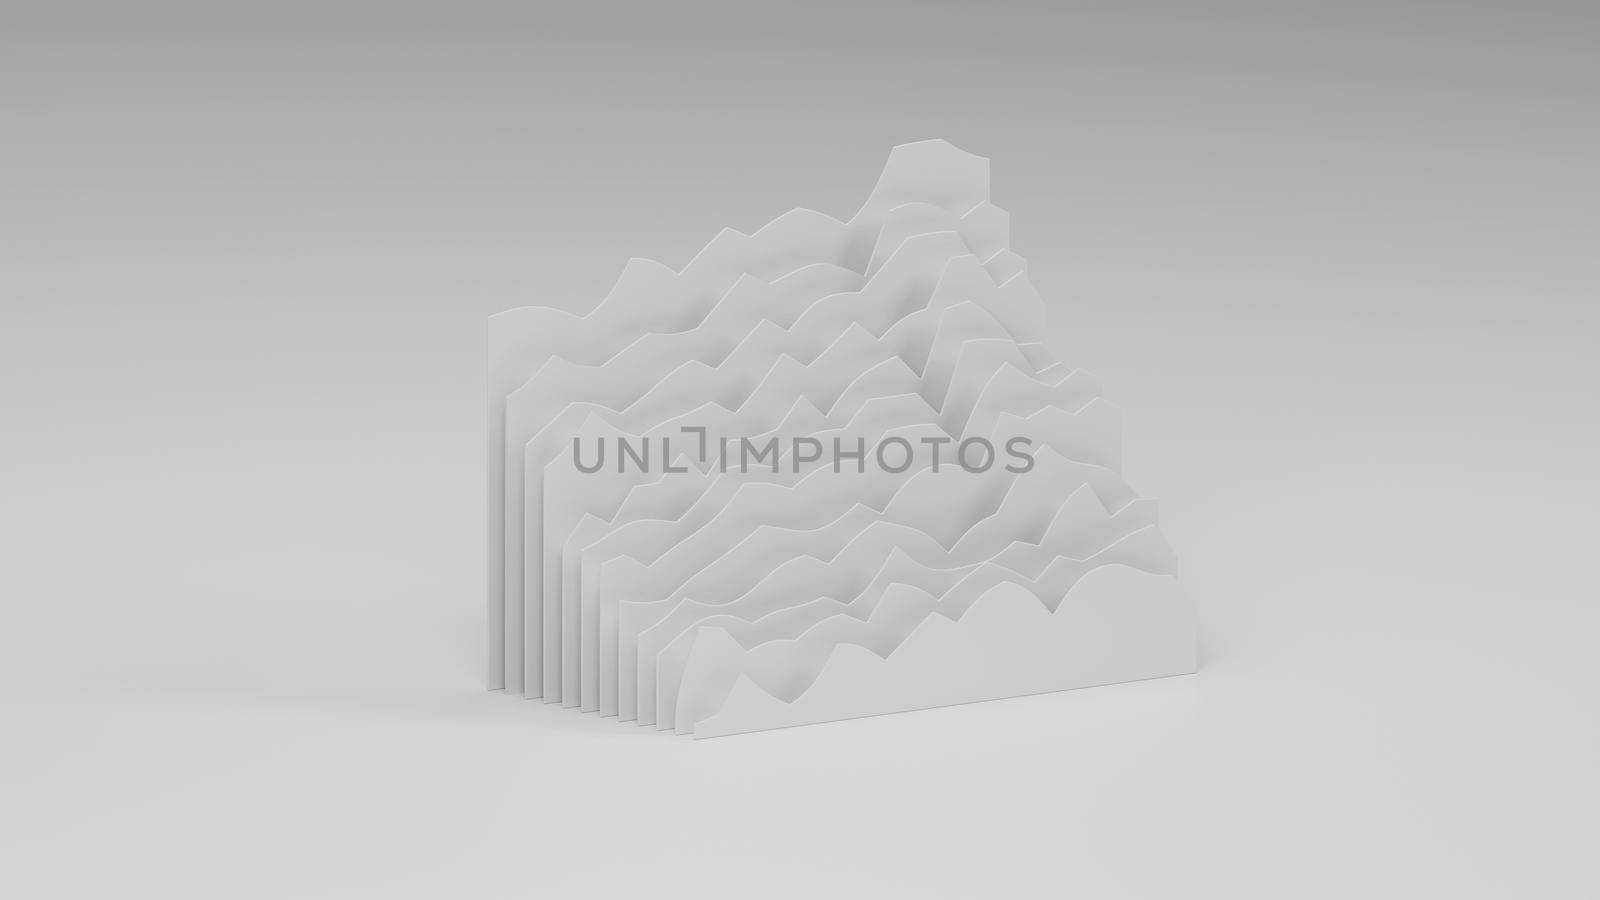 A Set of white charts 3D render